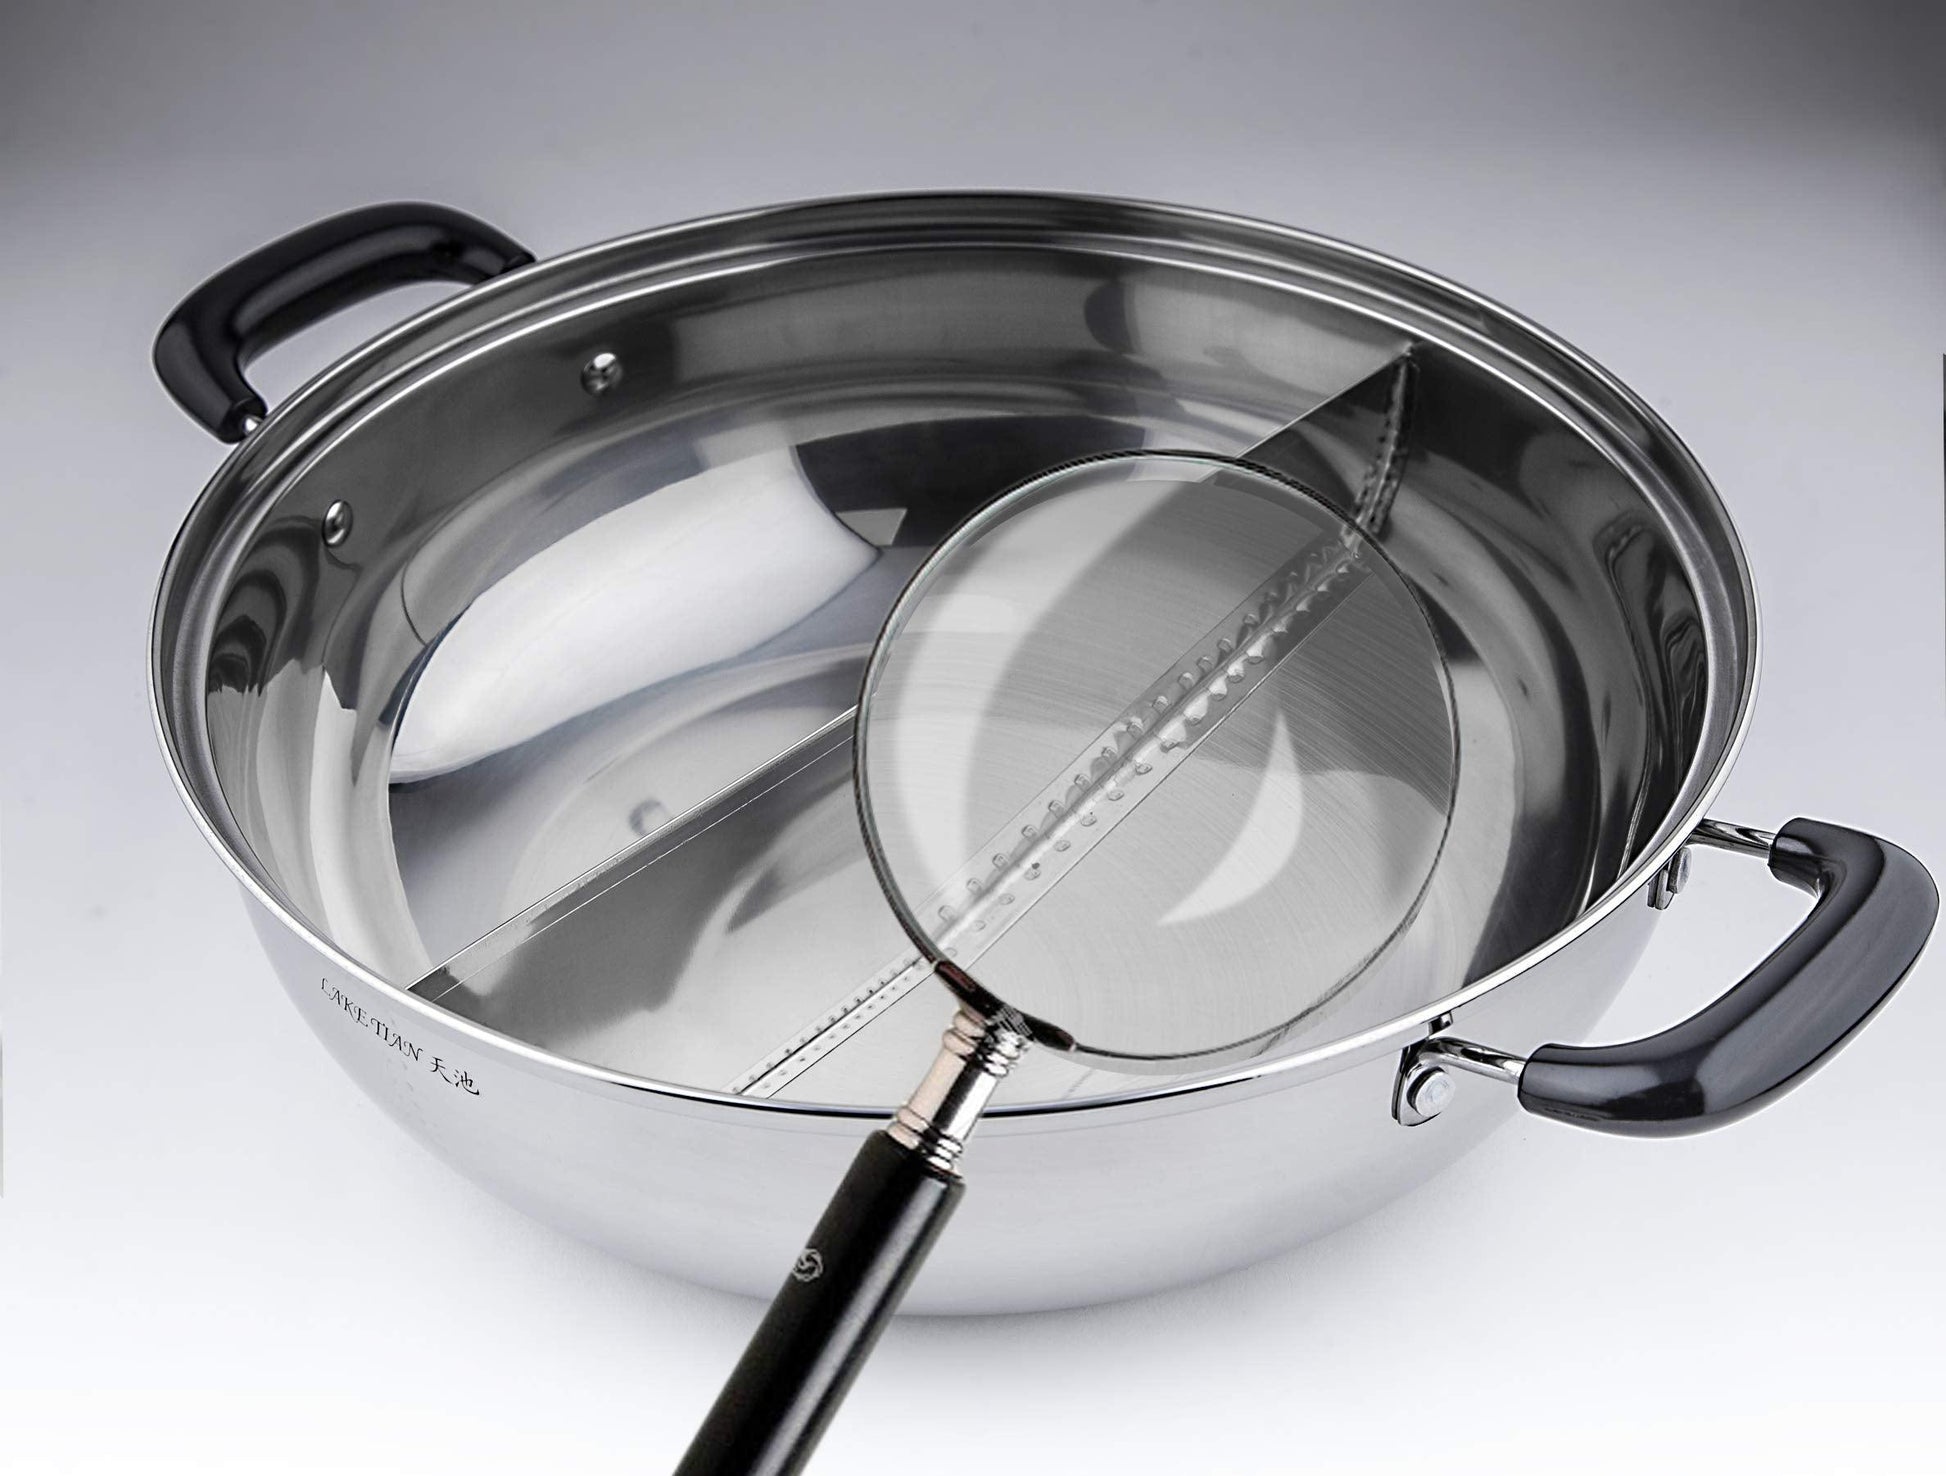 Lake Tian Stainless Steel Shabu Shabu Hot Pot, Dual Sided Yin Yang Hot Pot with Divider Include 3 Pot Spoons, 12 Inch 30 cm鸳鸯火锅 - CookCave